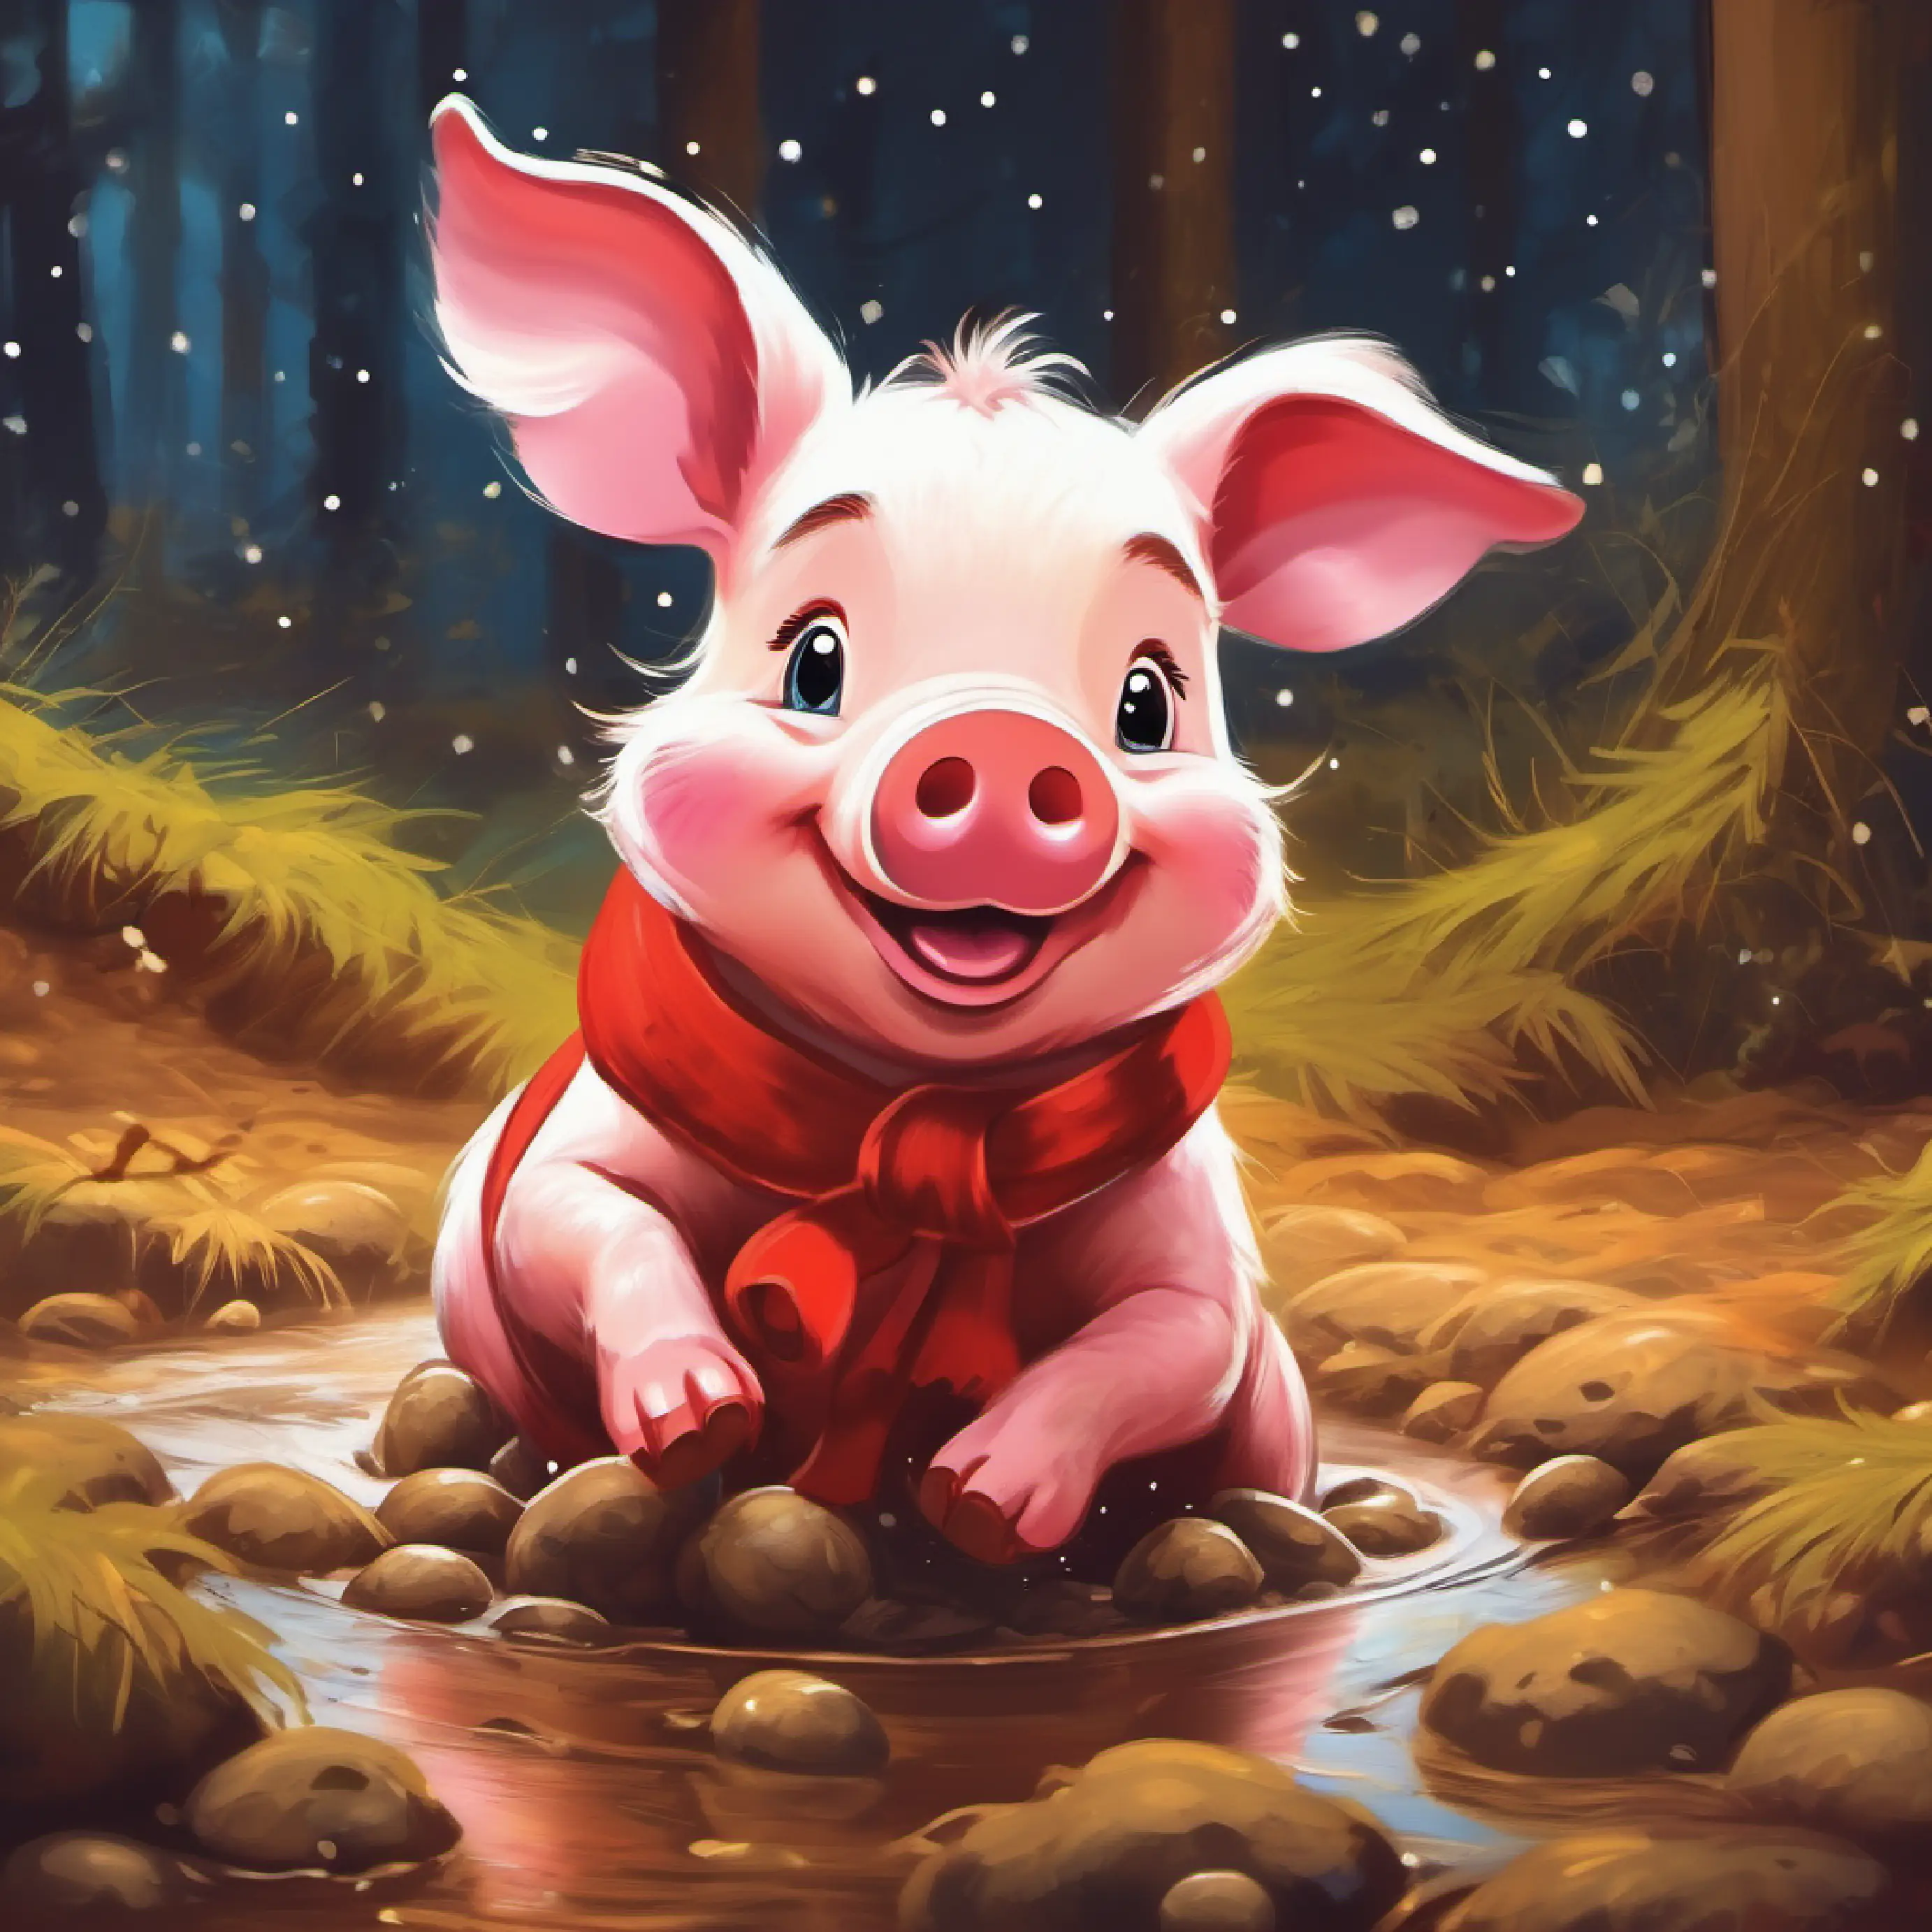 Piglet is enjoying playing in the mud.